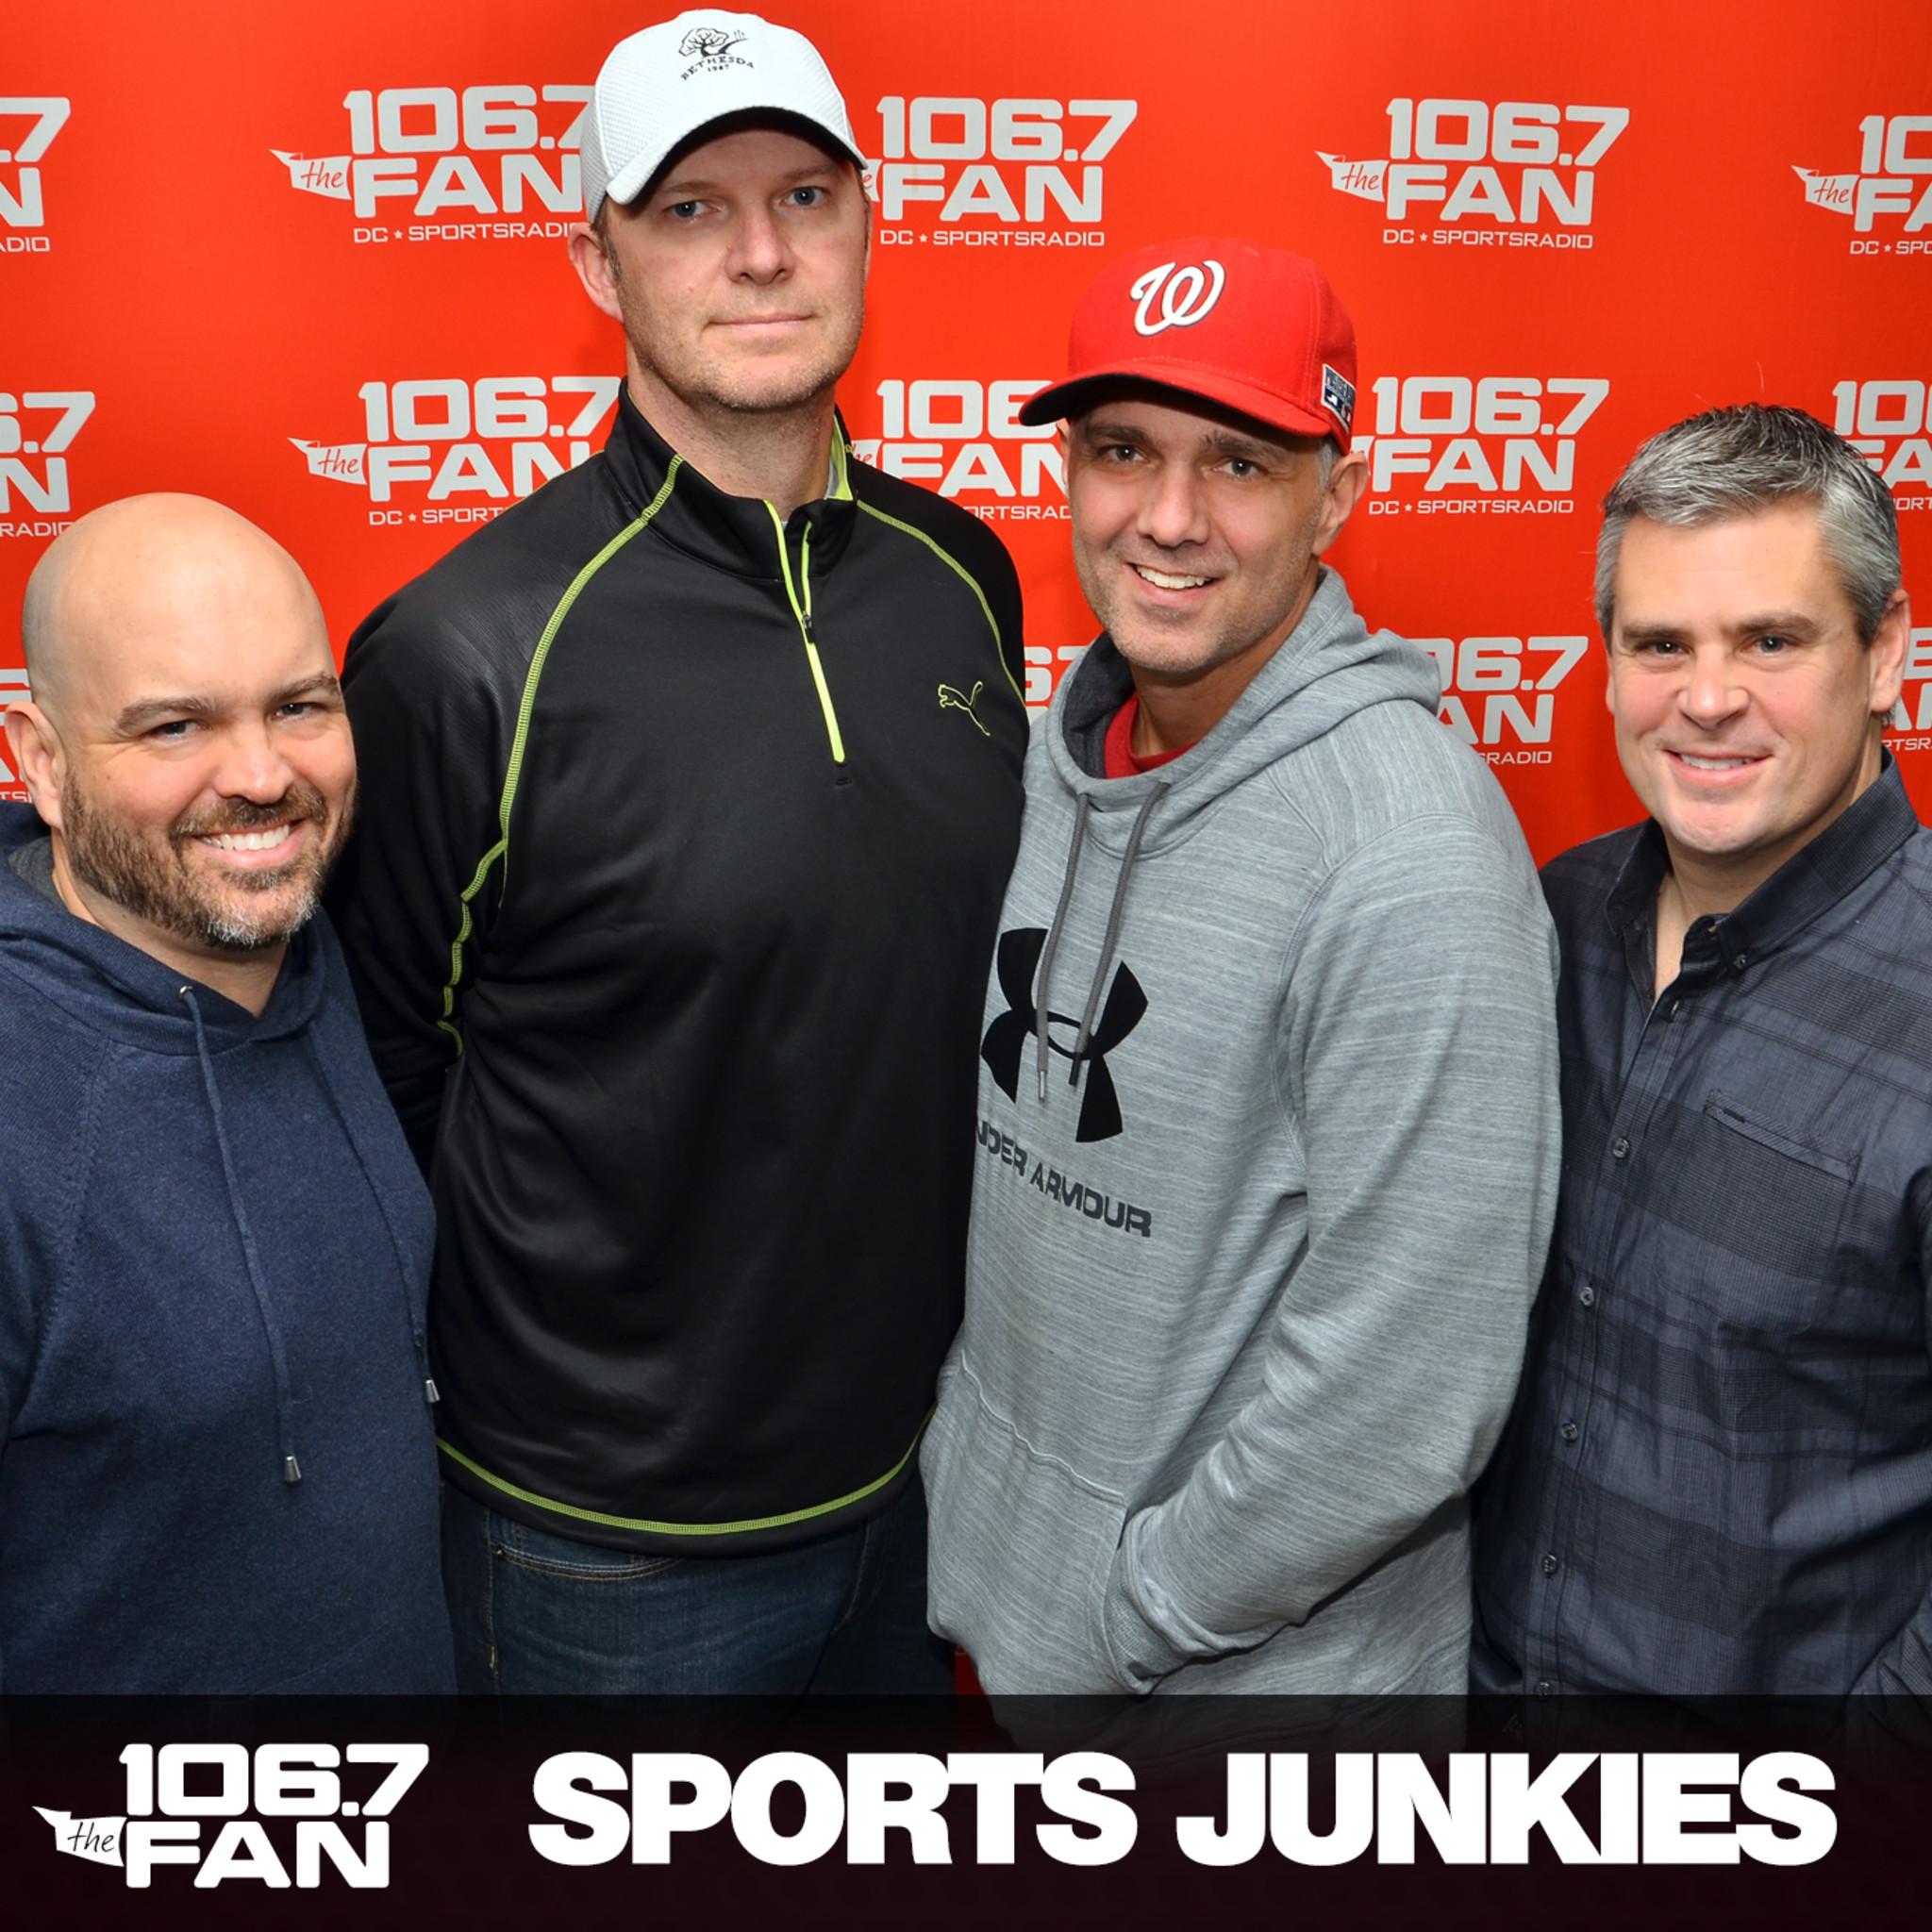 The Sports Junkies podcast